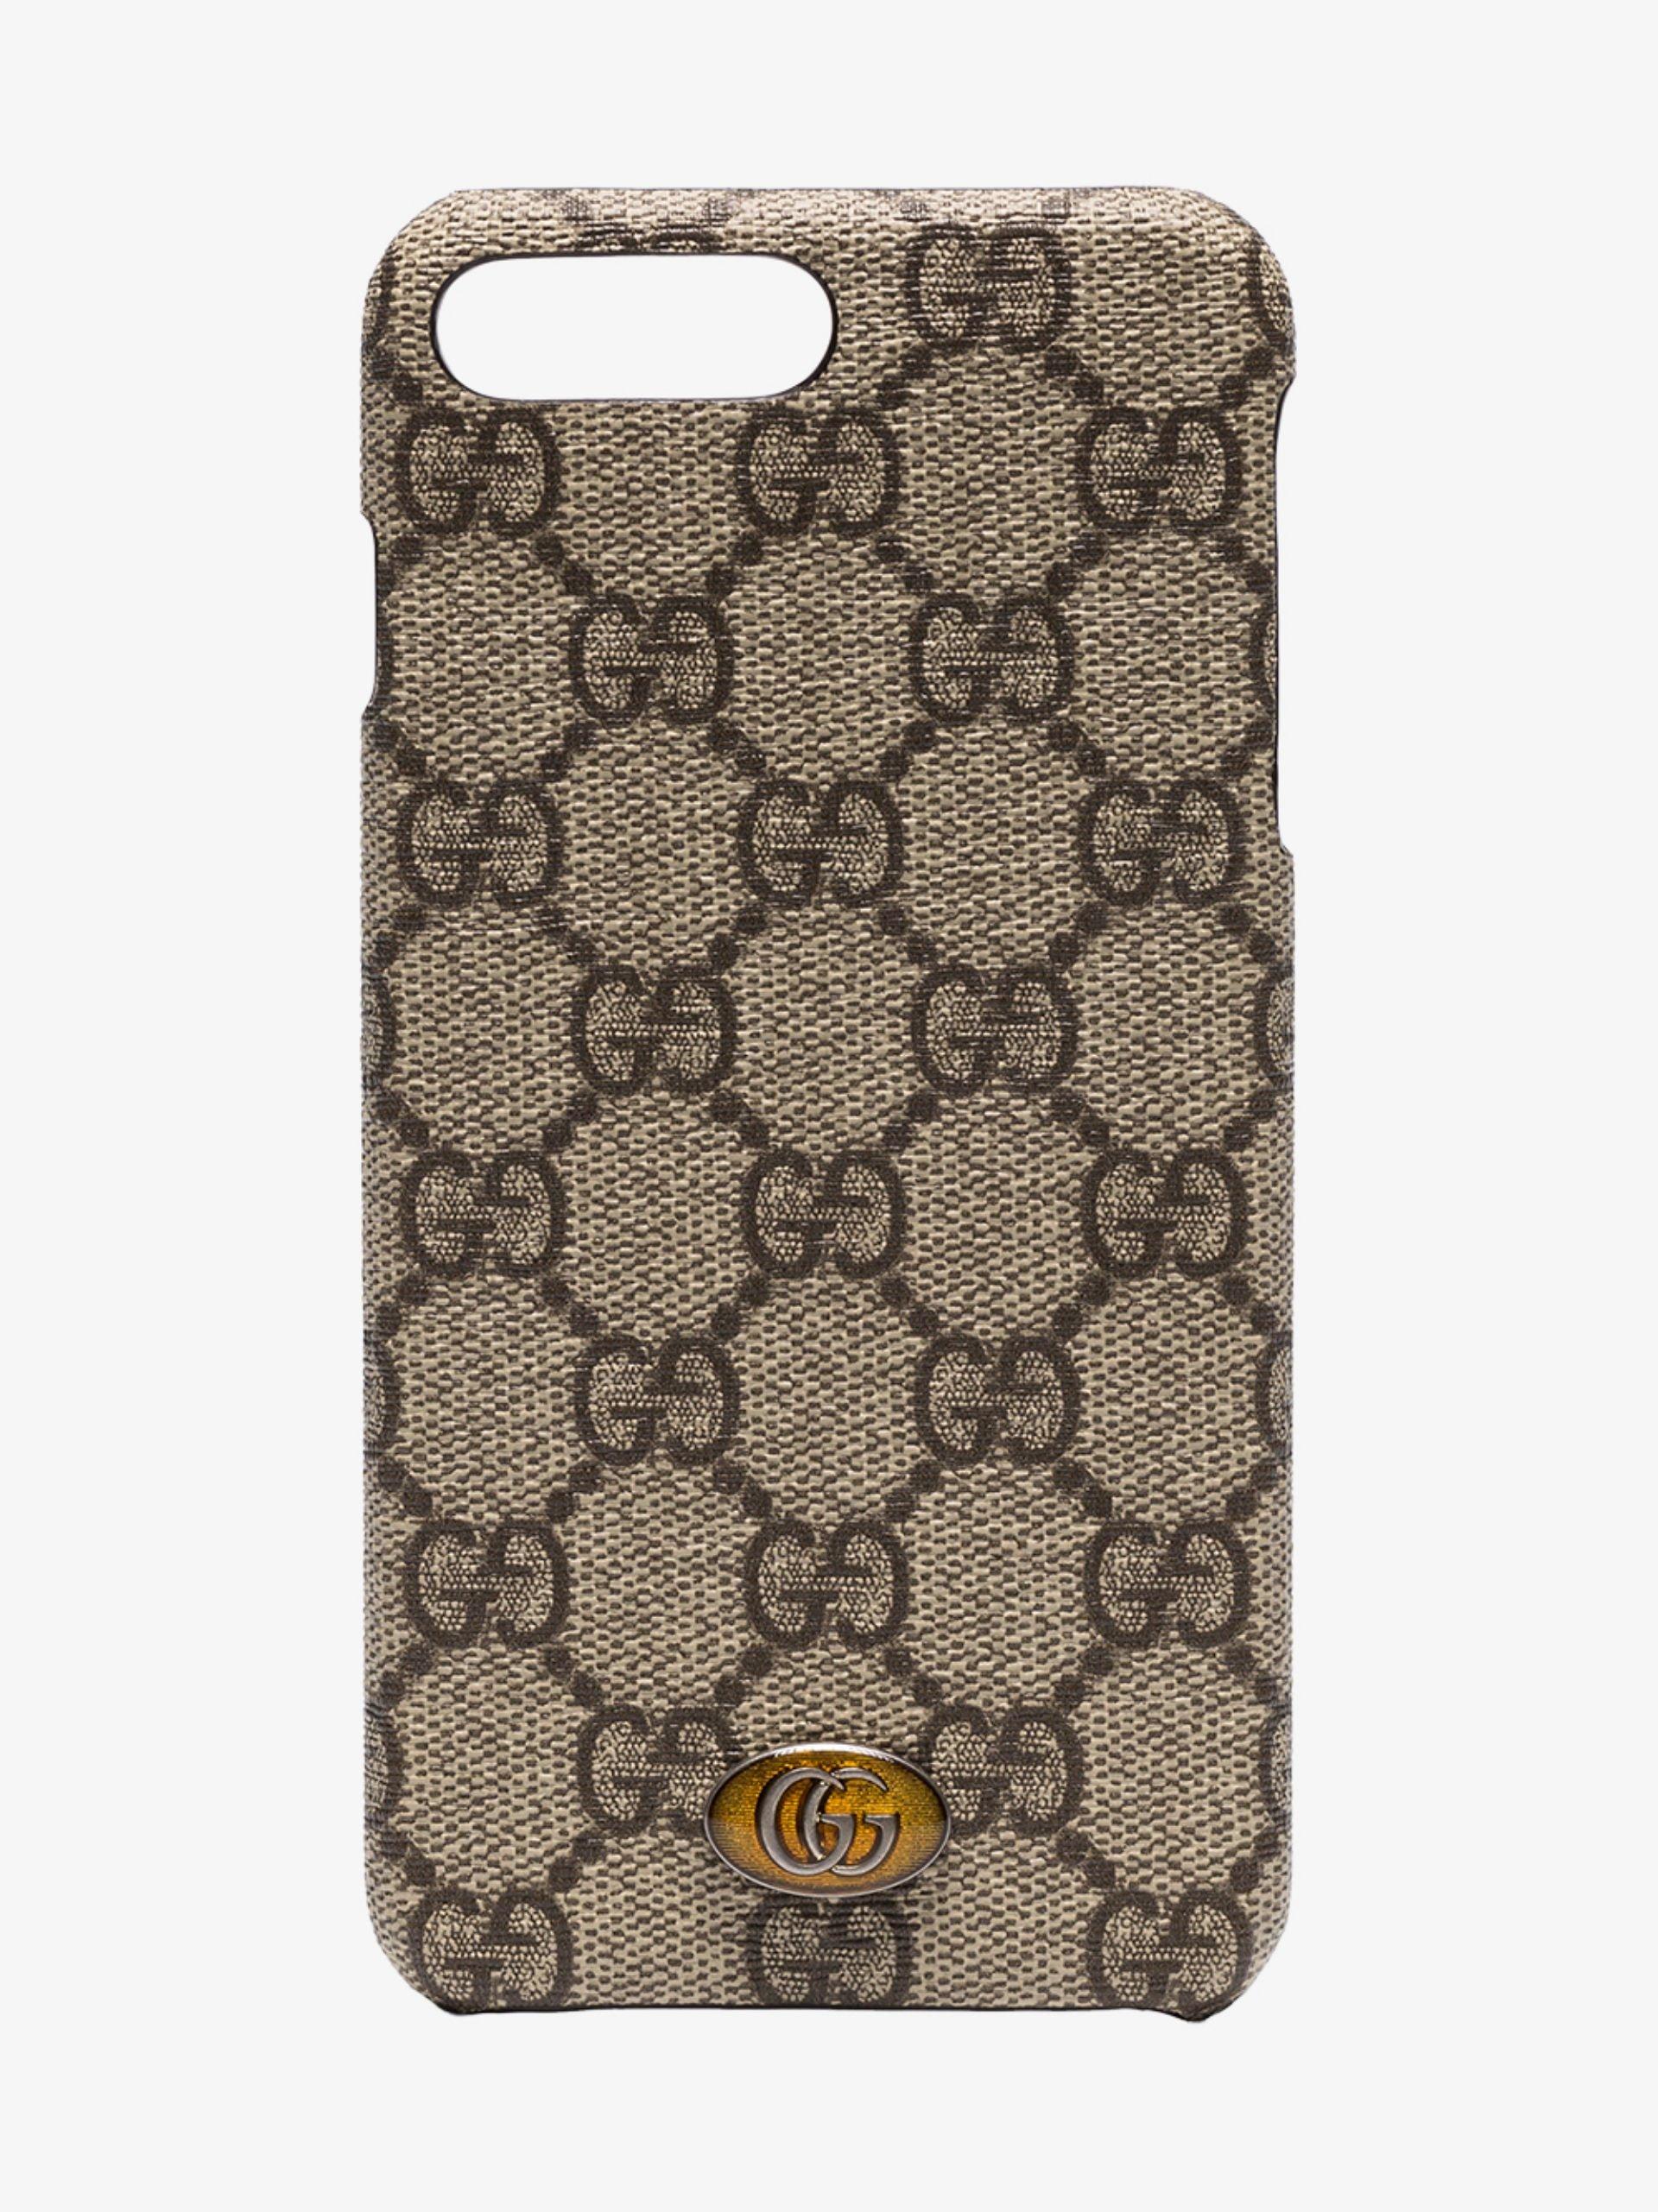 Gucci Canvas Ophidia Iphone 8 Plus Case in Brown | Lyst